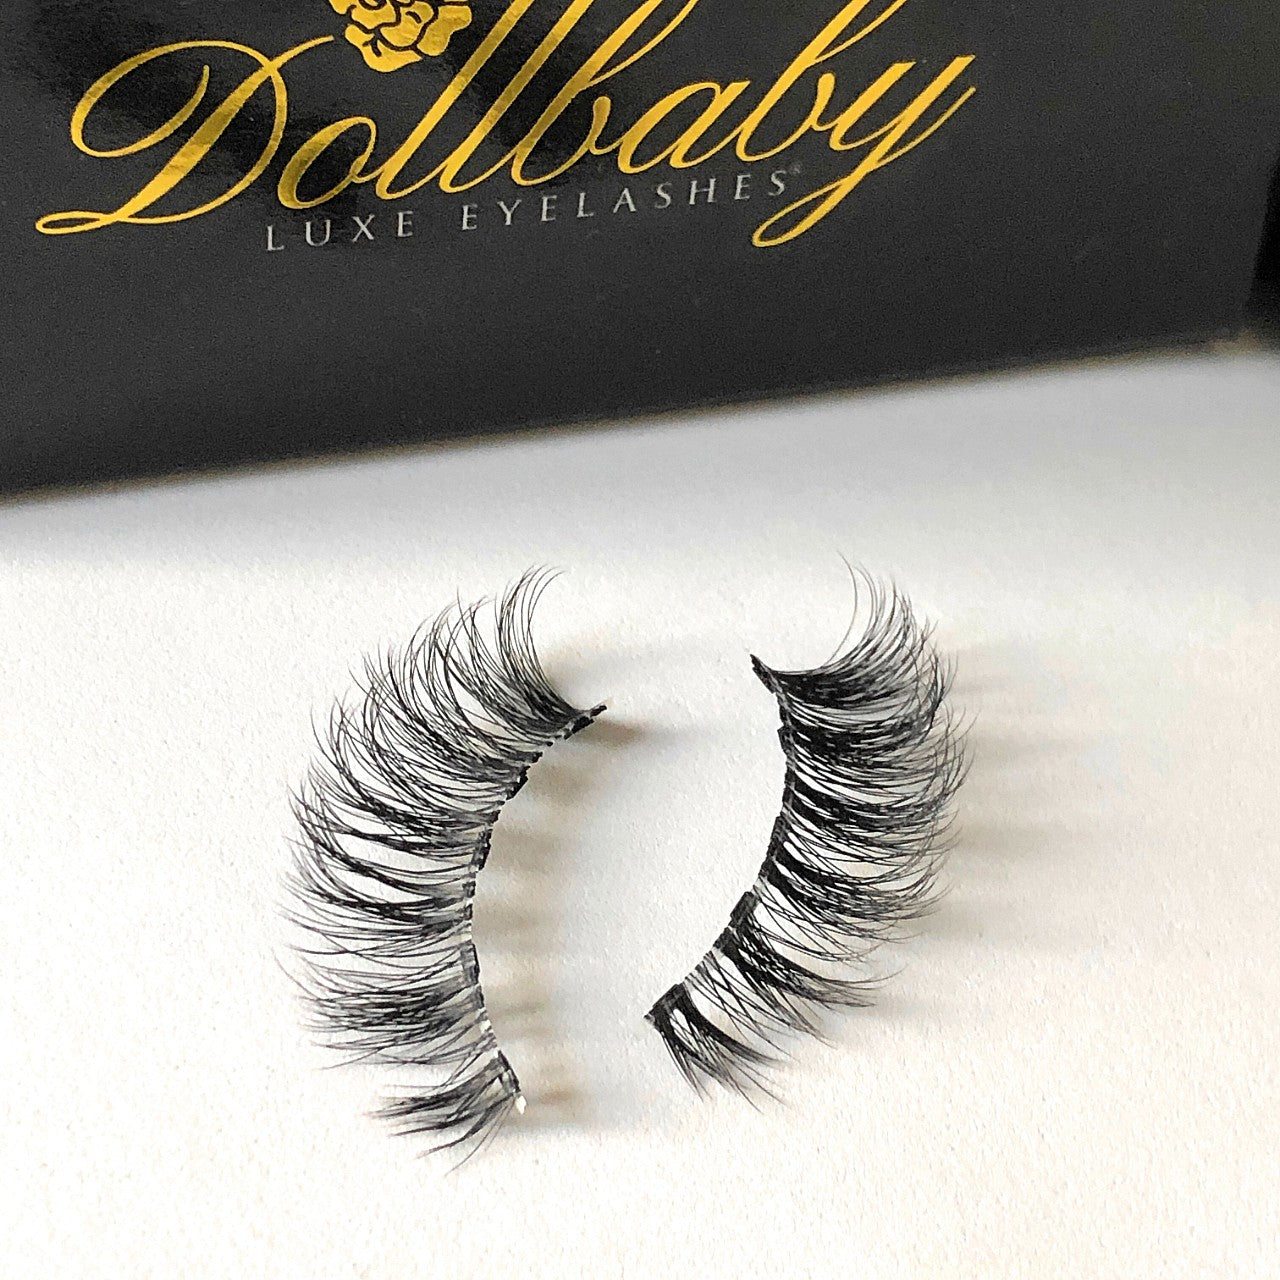 Marbella' Strip Faux Mink Eyelashes (Non-Magnetic) - Clear Band